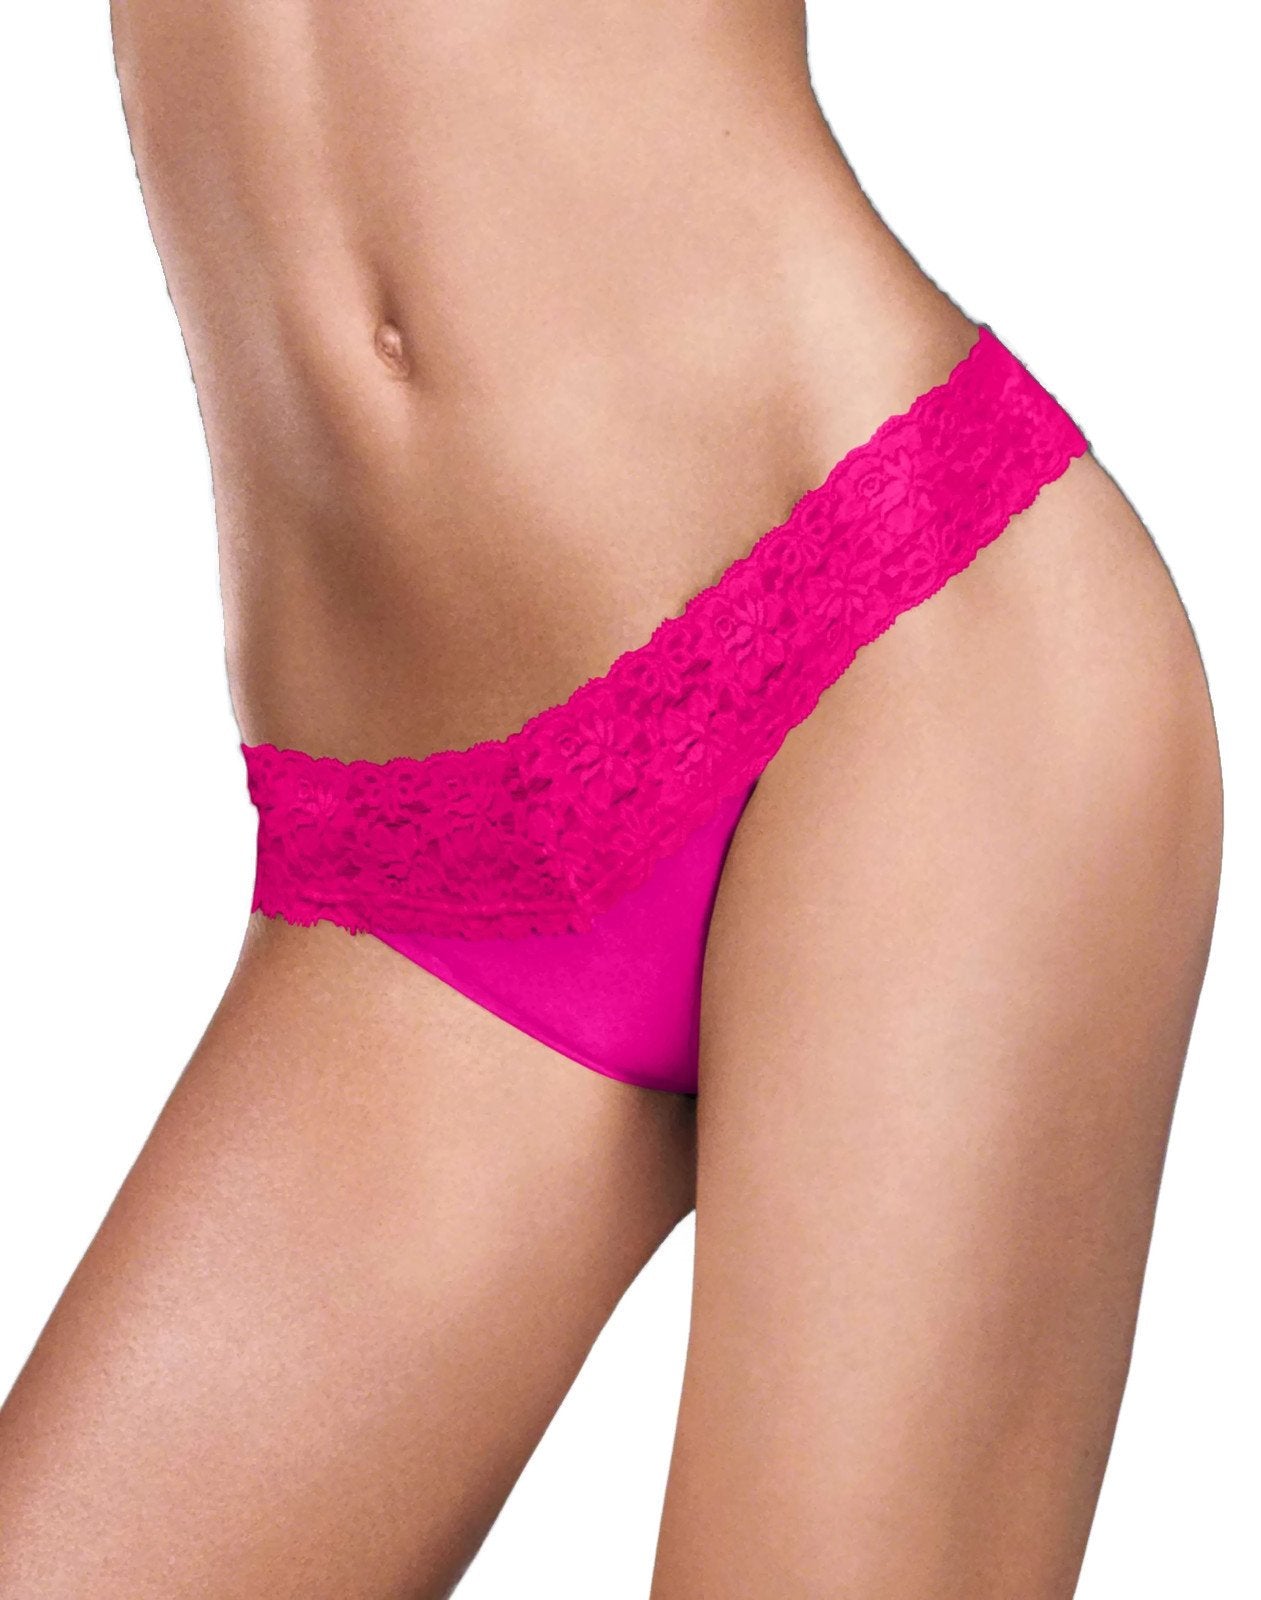 Maidenform Dream Lace Thong, S/M, Wild Strawberryâ€ – The Charming Turtle